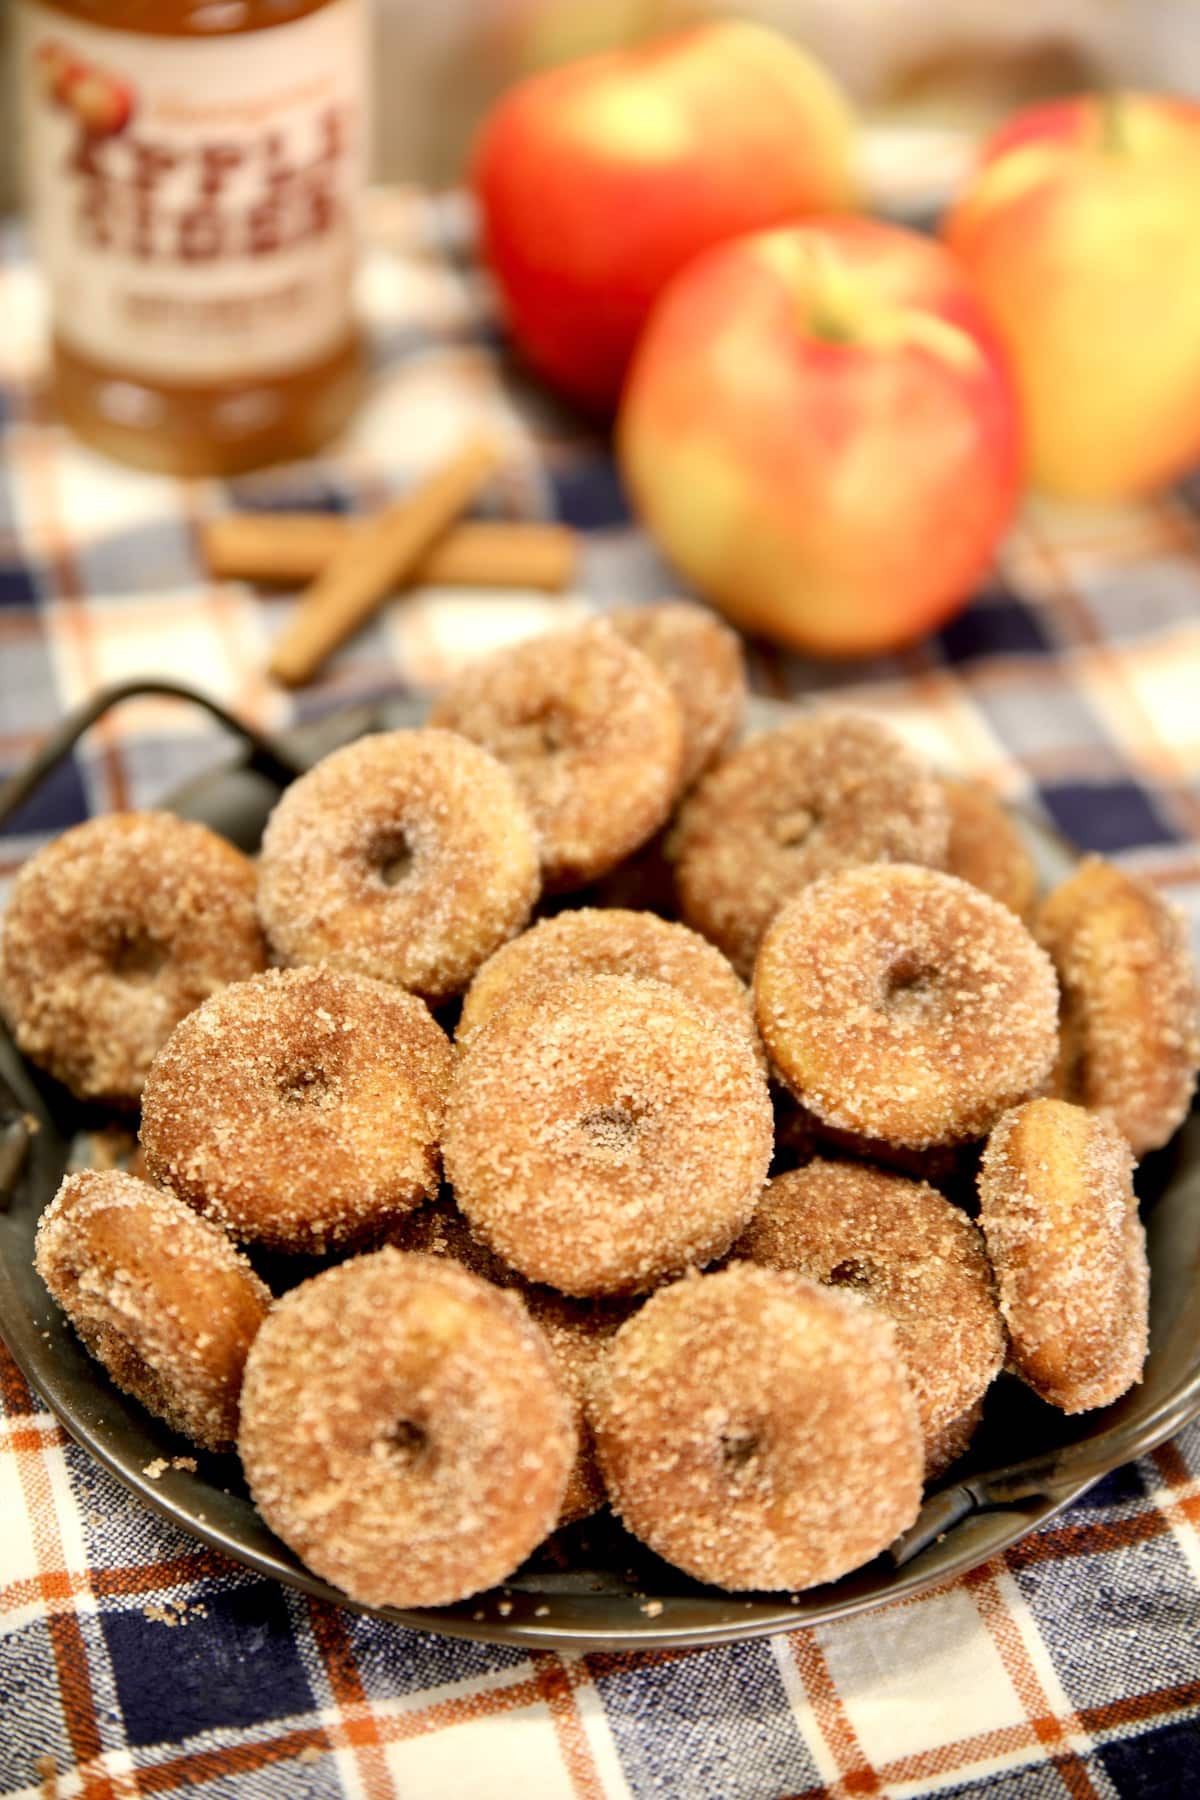 Apple cider donuts on a platter, apples and cider in background.